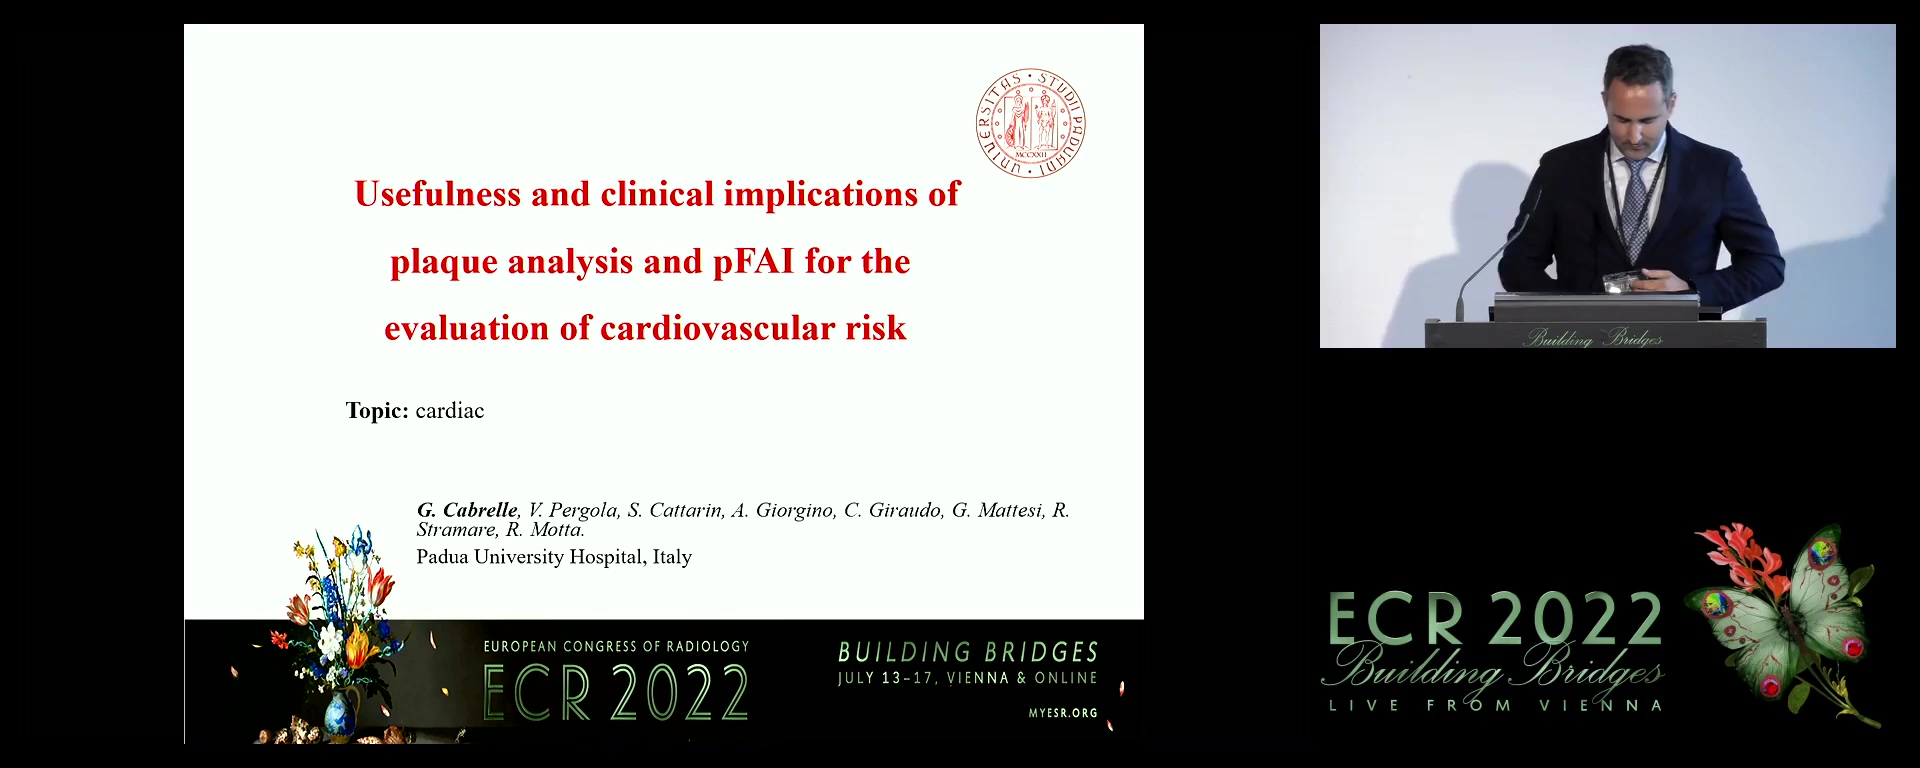 Usefulness and clinical implications of plaque analysis and pFAI for the evaluation of cardiovascular risk - Giulio Cabrelle, Padua / IT